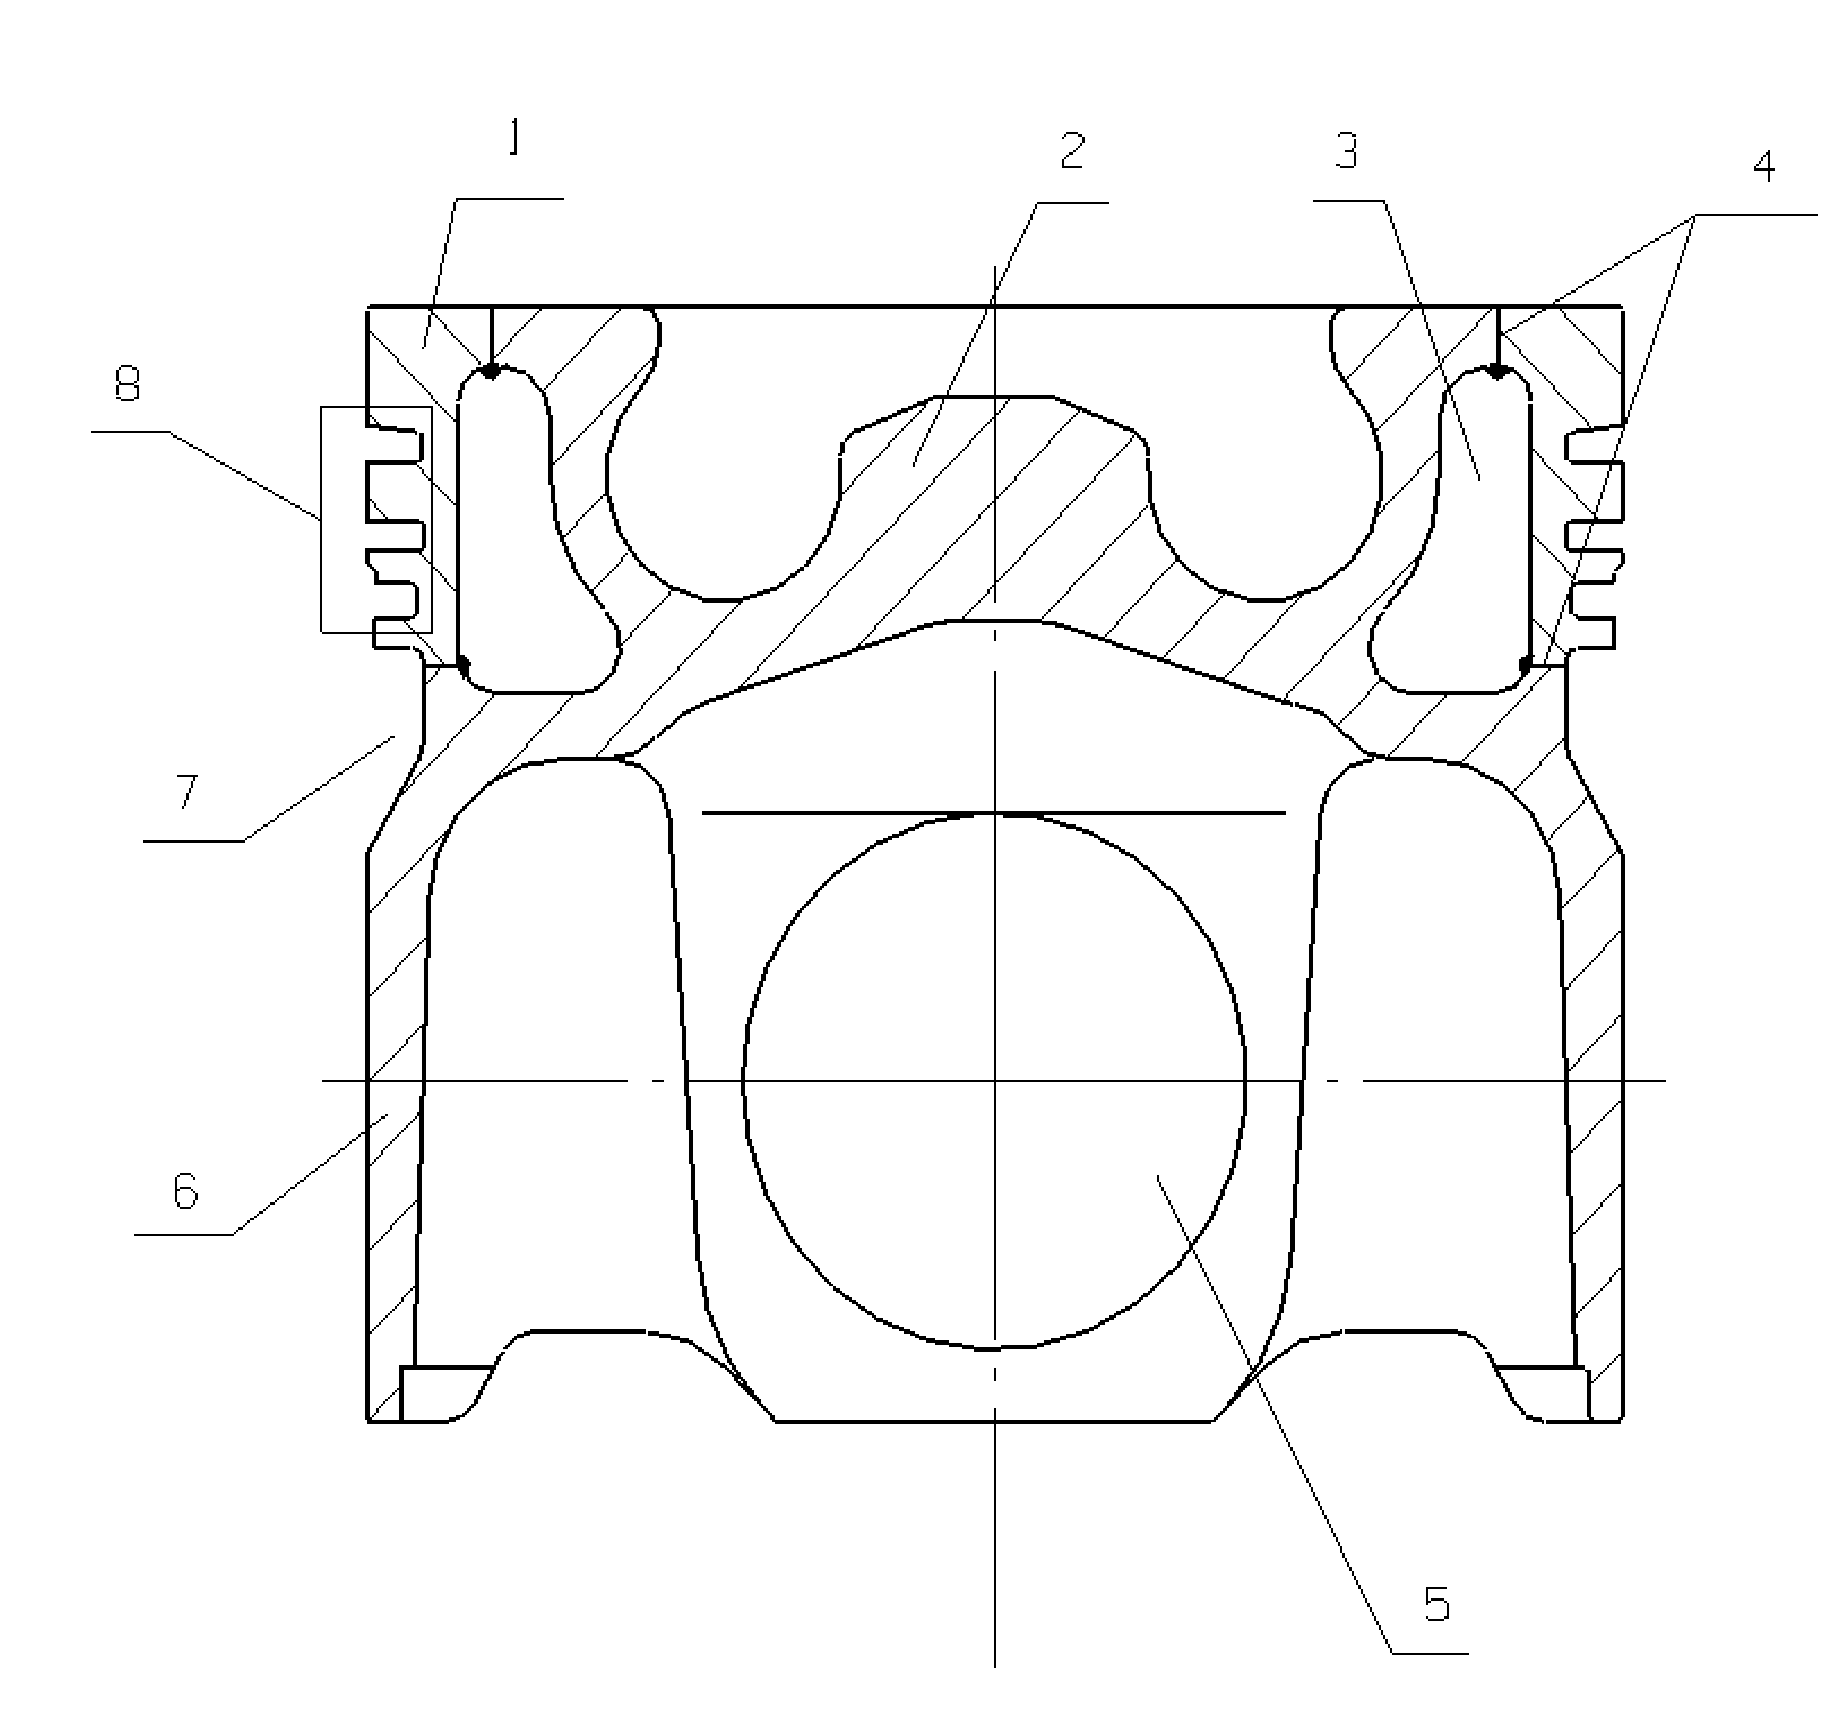 Single-piece forged-steel piston with inner oil cooling chamber and a method for manufacturing thereof